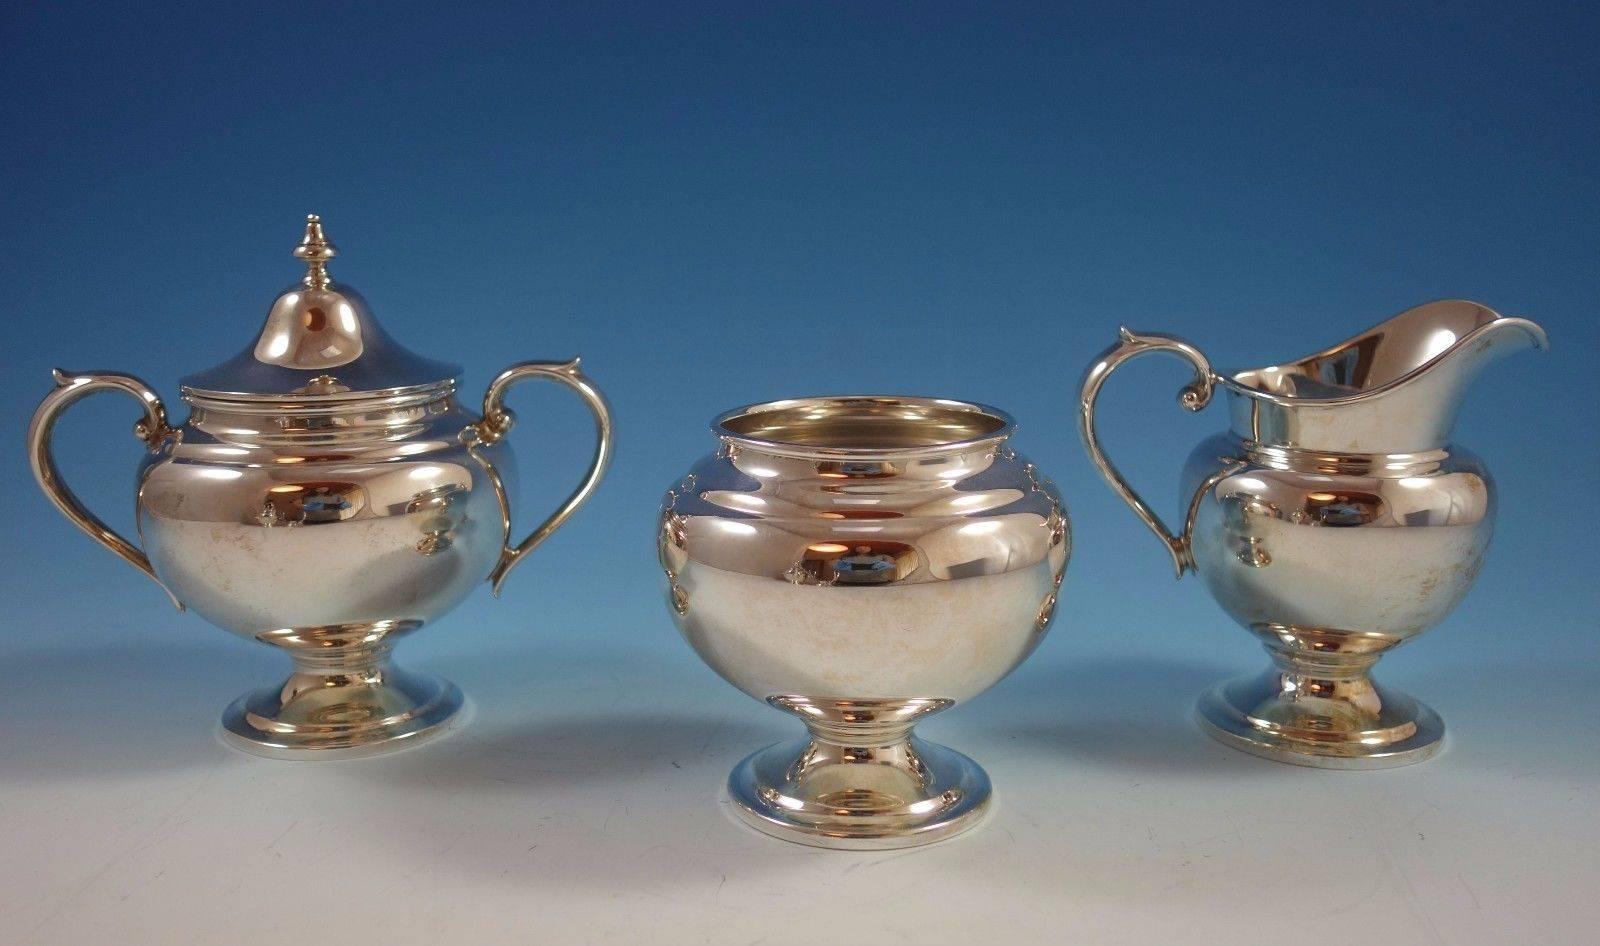 Puritan by Gorham Sterling Silver Tea Set Six-Piece Set with Tray, Hollowware 3